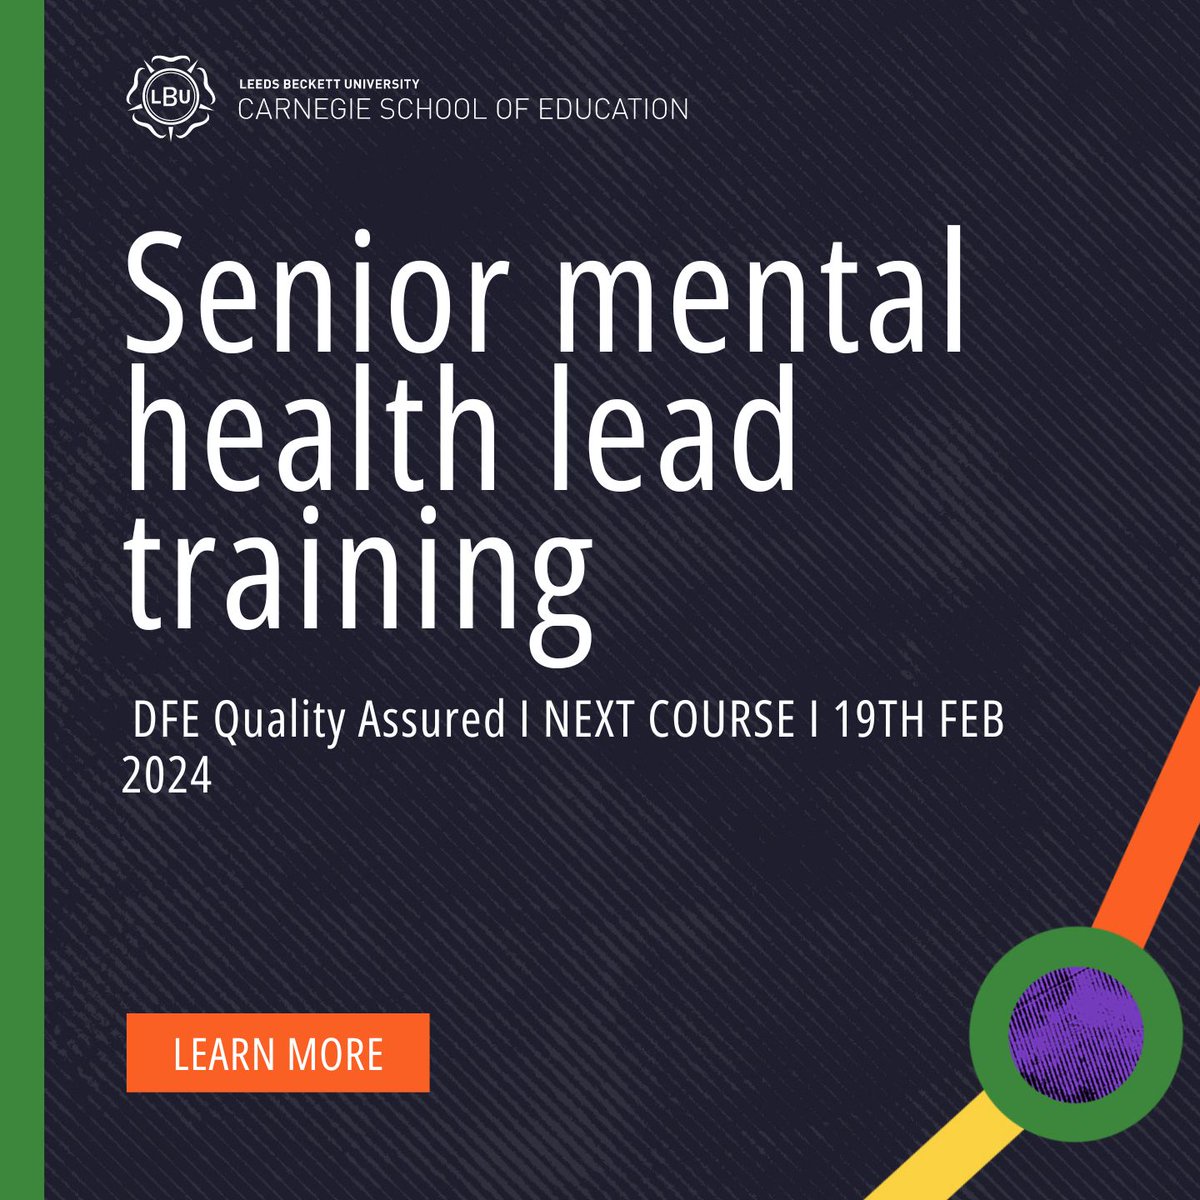 🗓️ School leaders! Mark your calendars for 19th February – the next start date for our DfE quality assured Senior Mental Health Lead Training Courses. 🌟 Join us for support and strategies for improving mental health in your school. ow.ly/8nug50Qzy7v